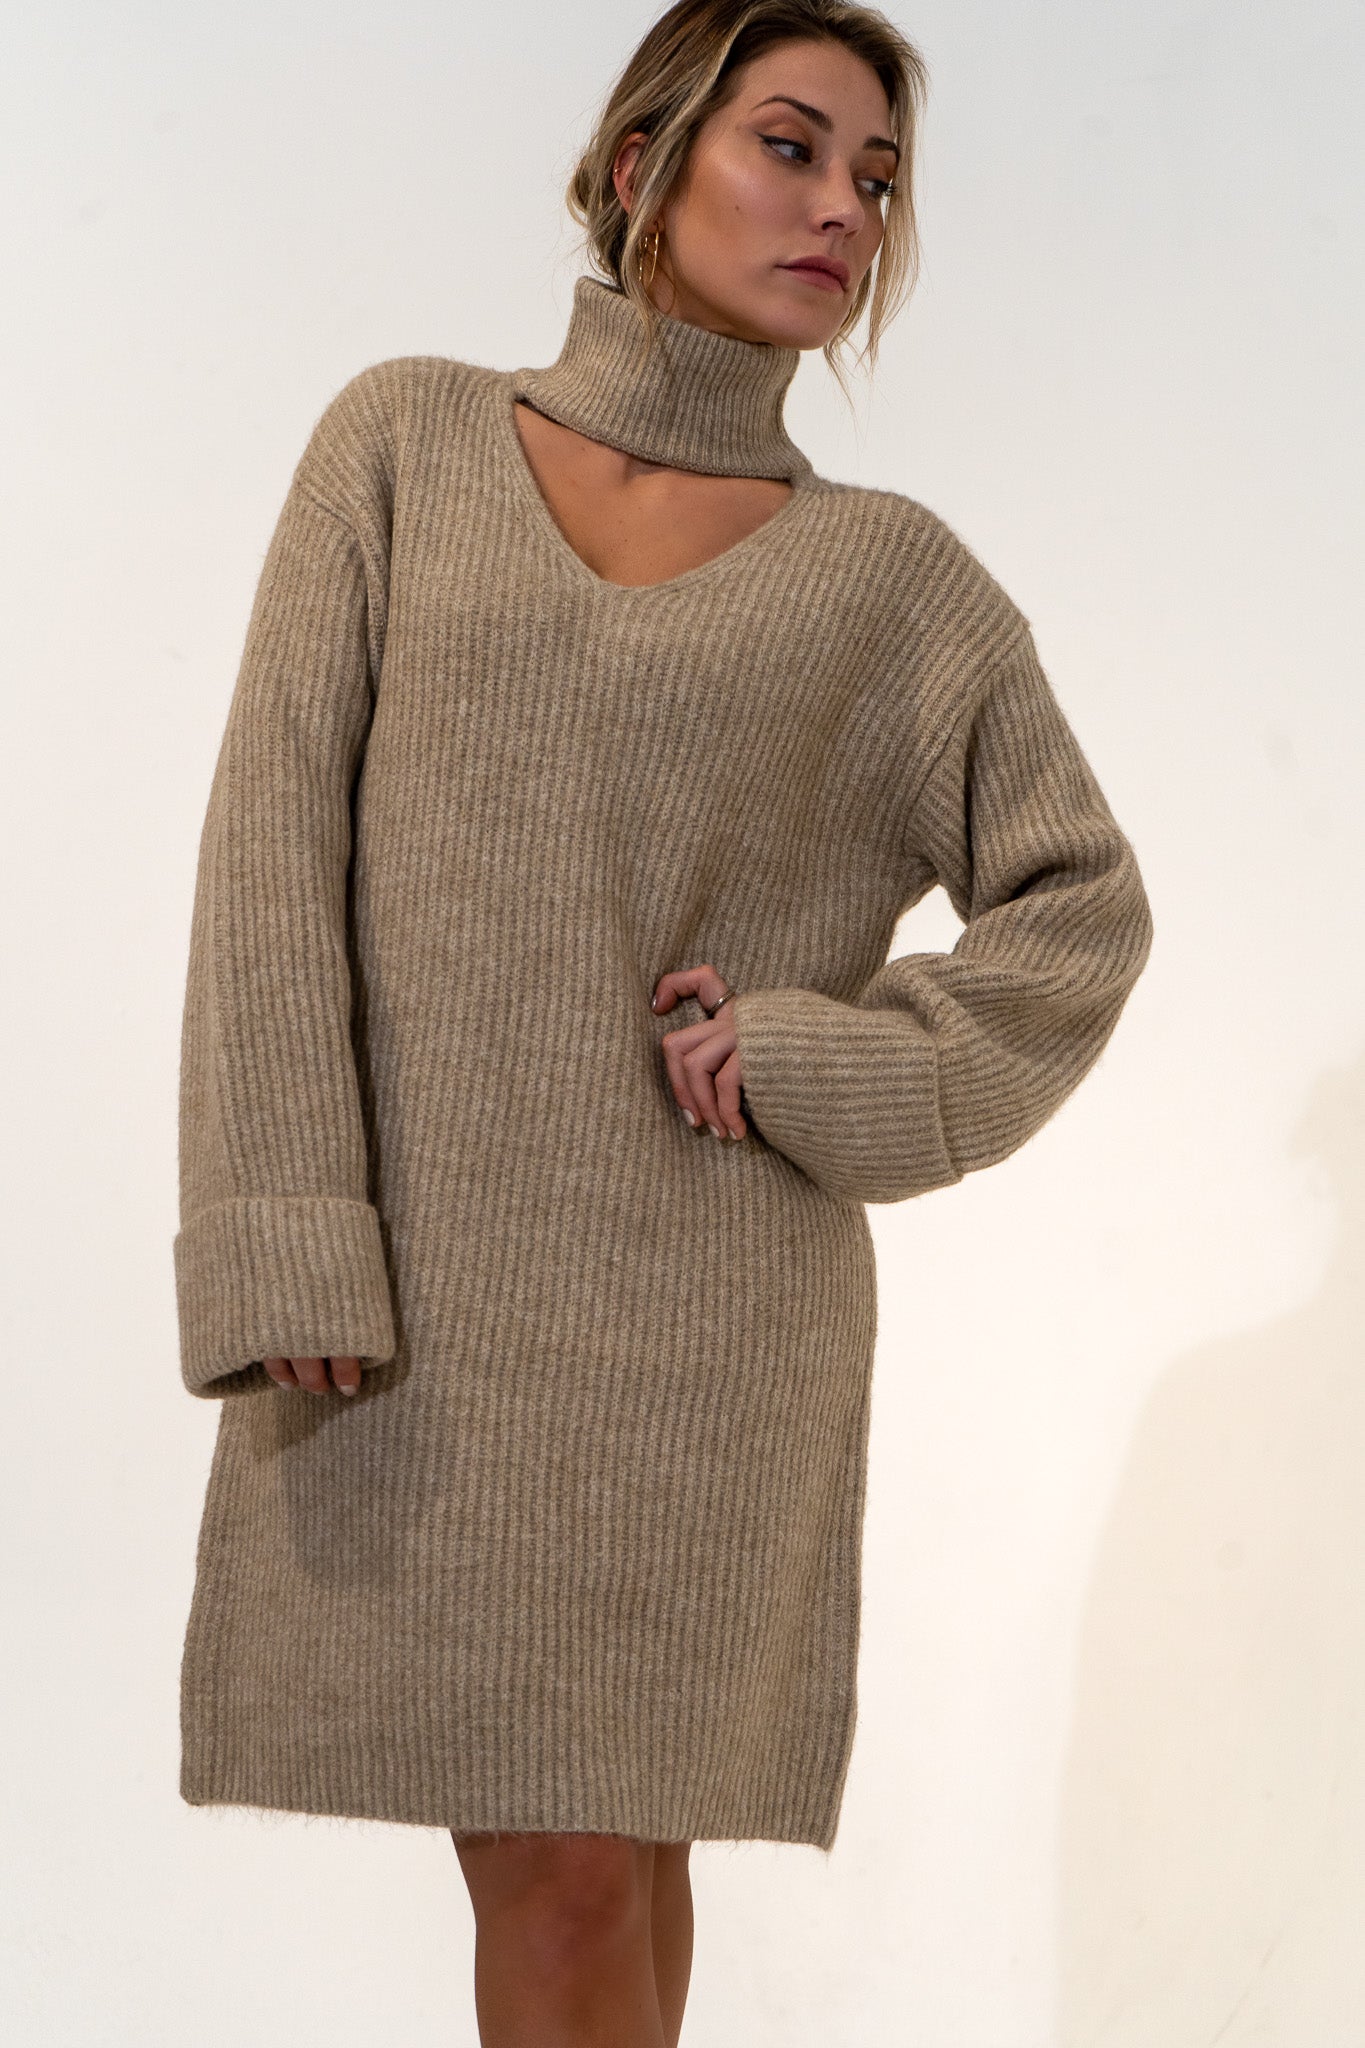 Featuring a relaxed fit, The Kate Sweater Dress is an effortlessly cool design that pairs well with just about everything, while our favorite way to style is with tights and your favorite pair of boots. Mock neck with a V-style cut out on chest. Oversized cuffed sleeves. Quality ribbed material, slightly brushed. 